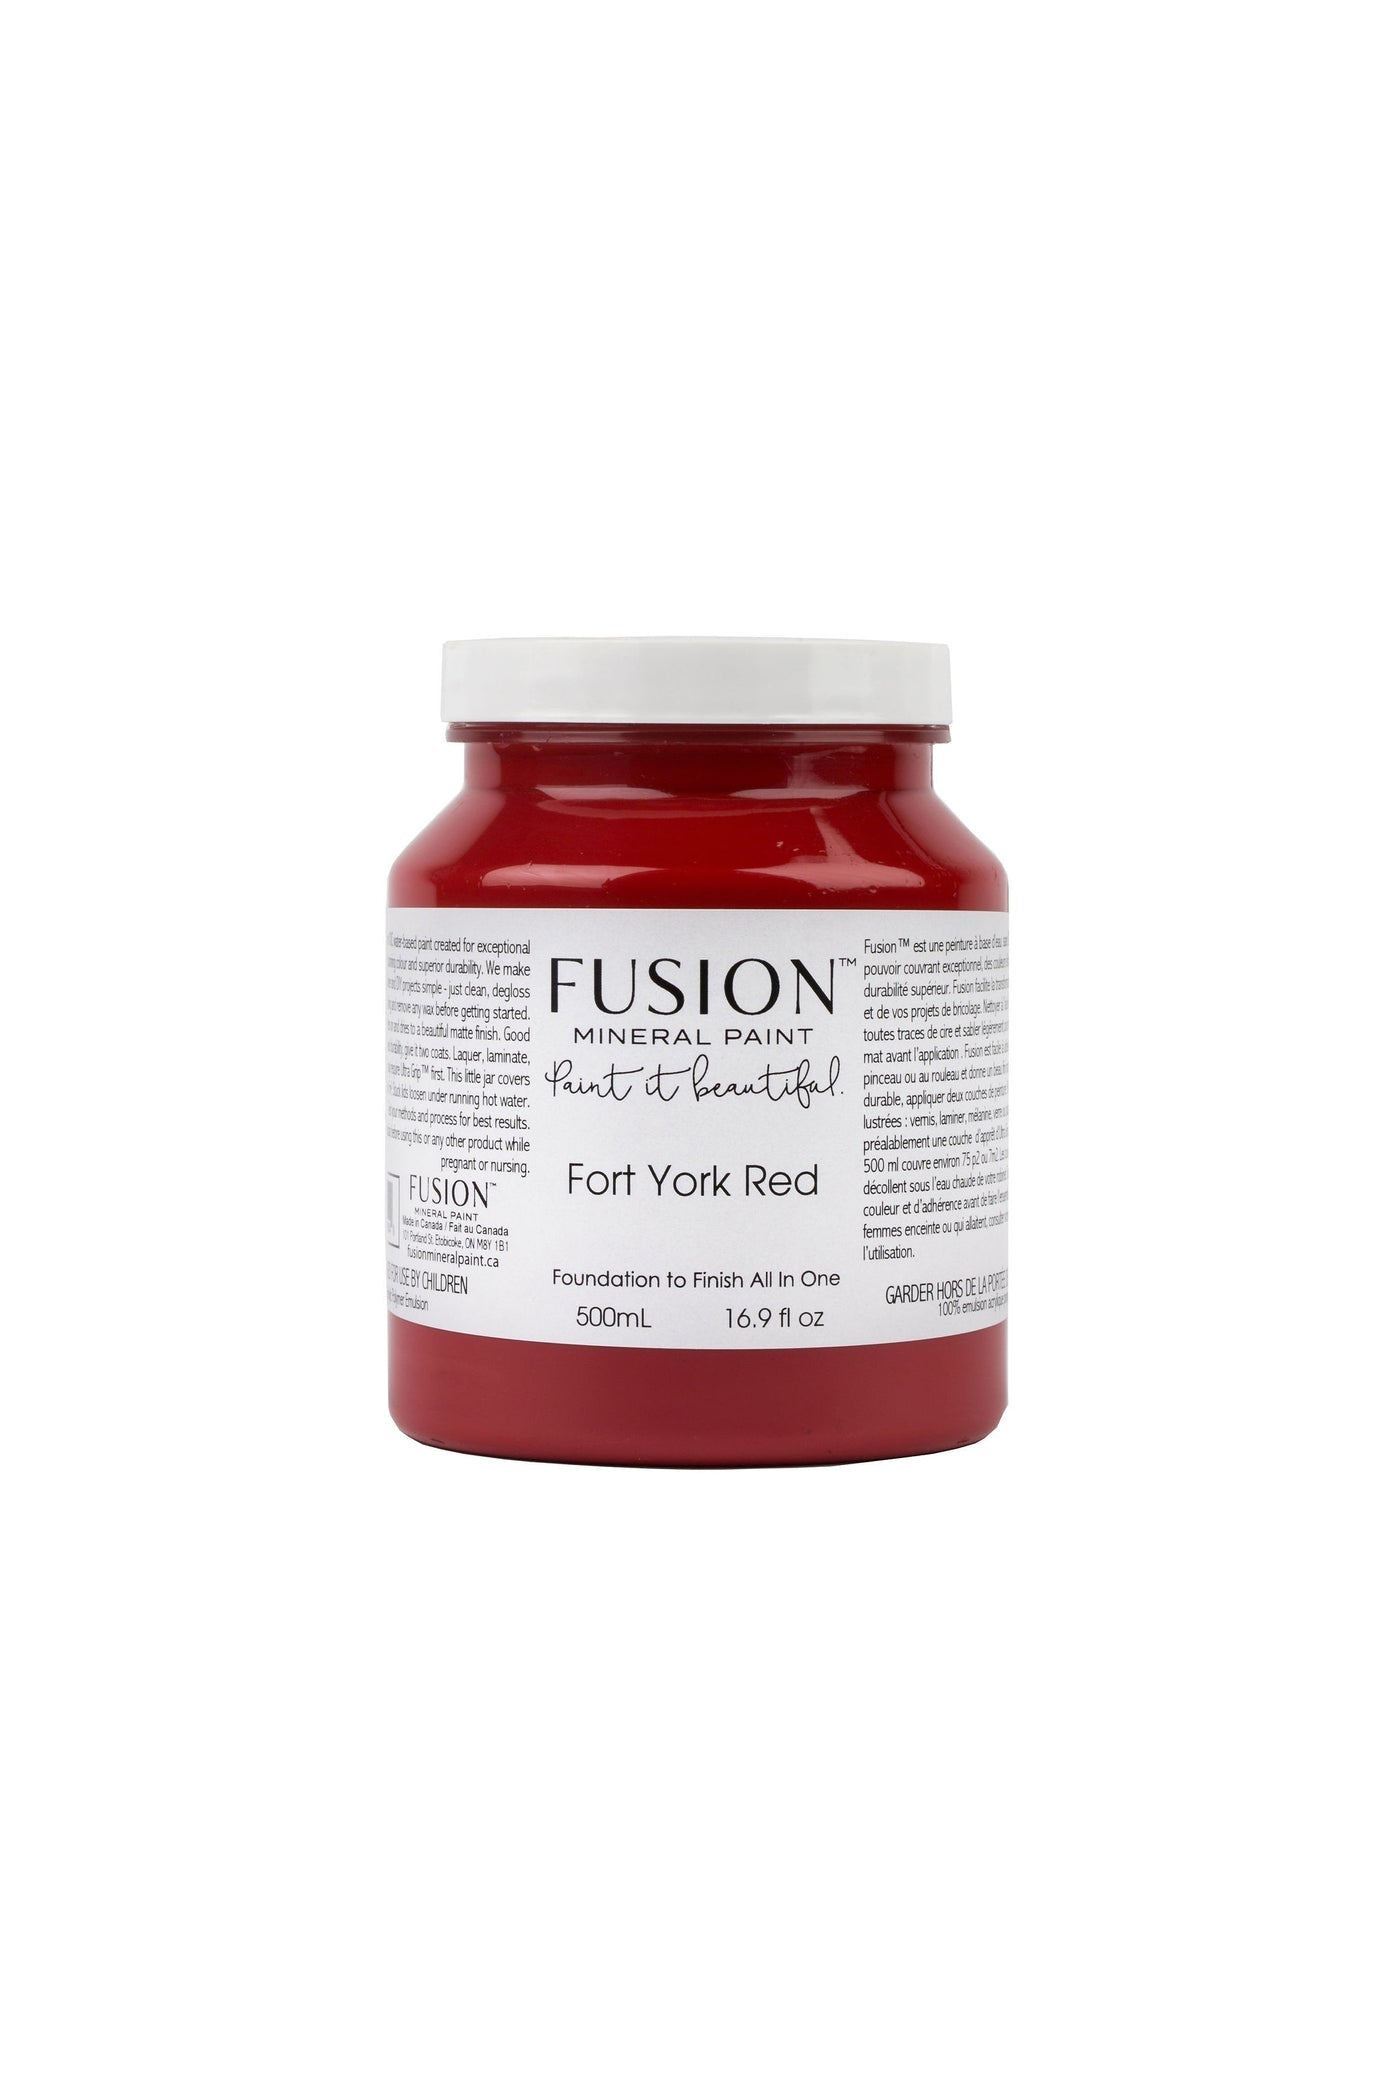 FORT YORK RED - FUSION MINERAL PAINT